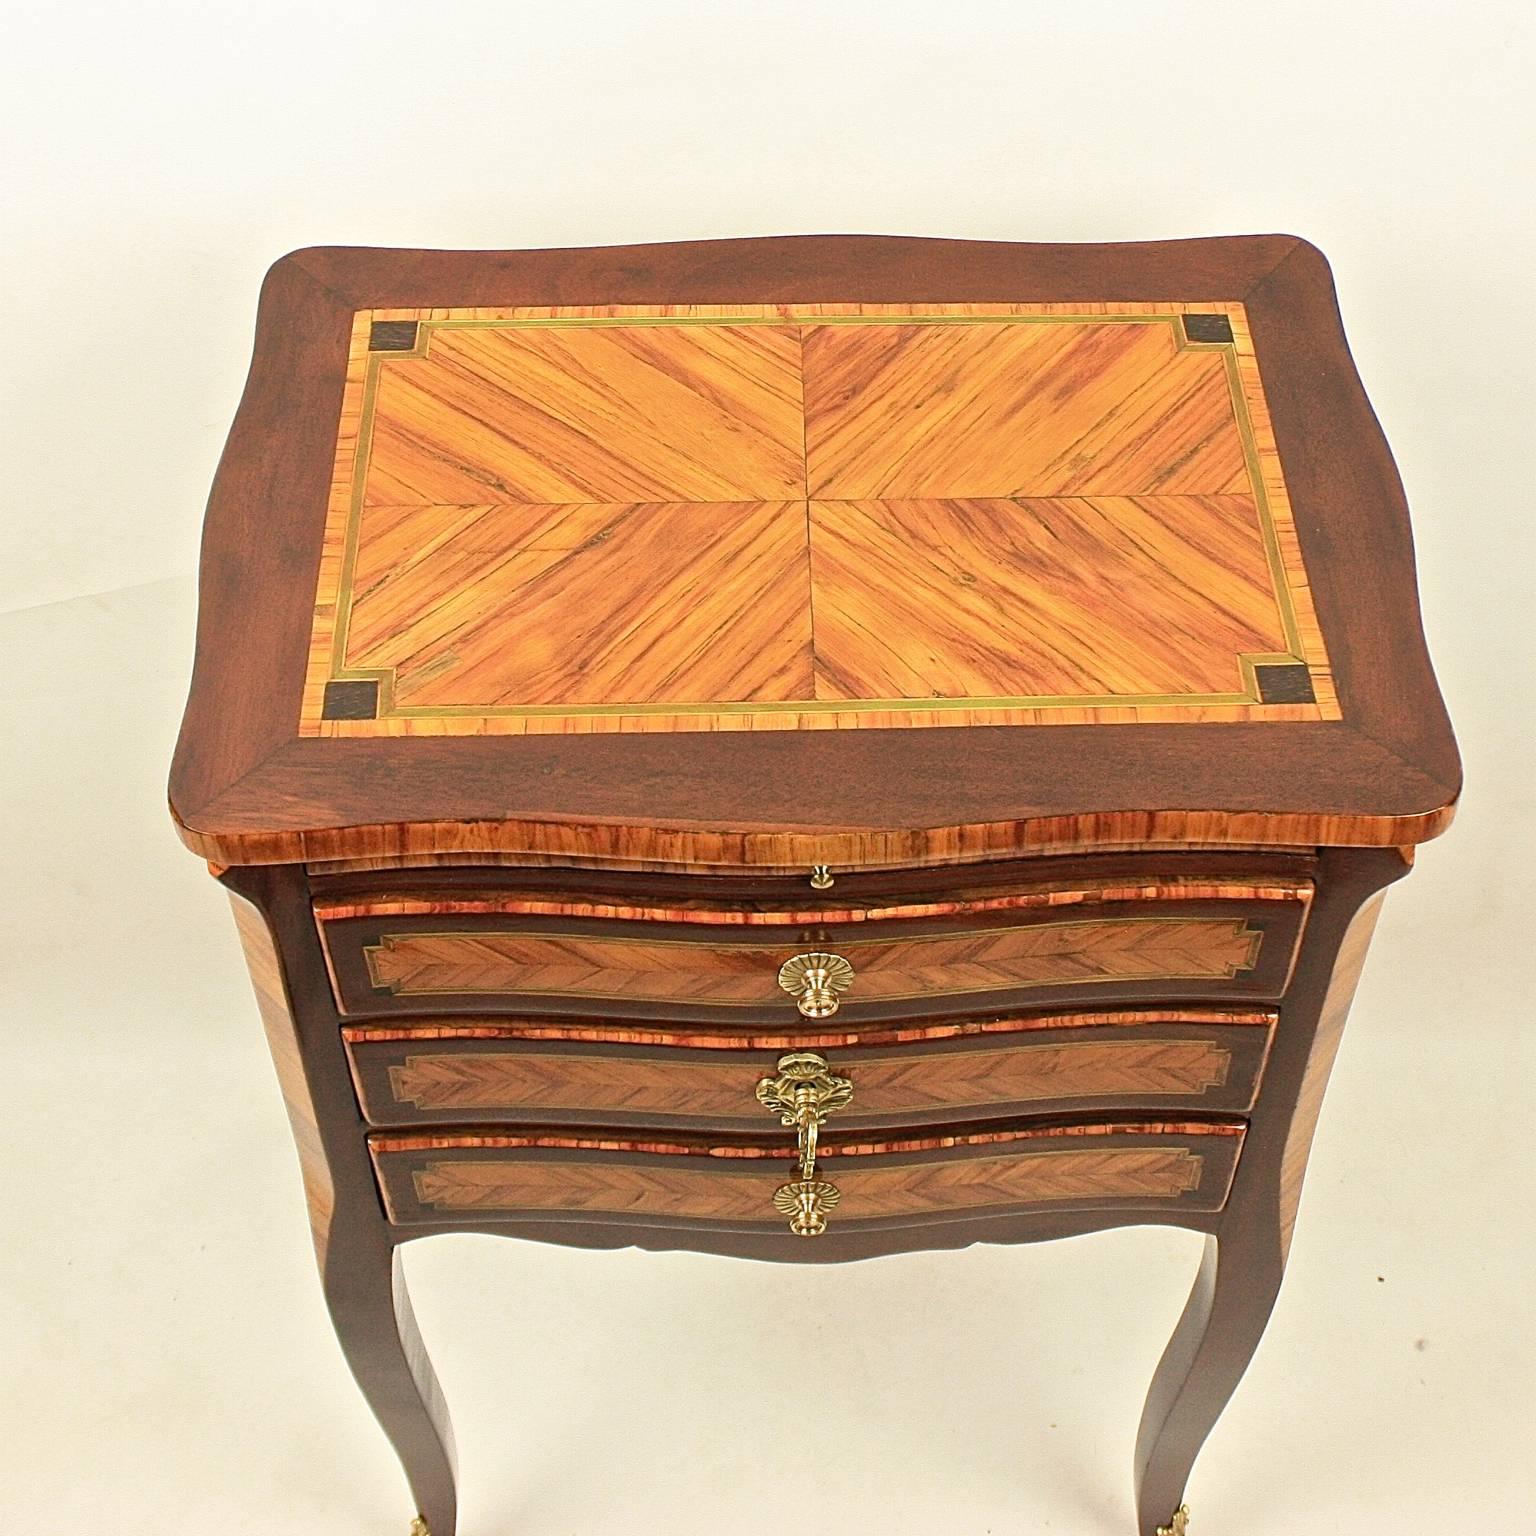 French Louis XV Gilt-Bronze Mounted Marquetry Centre Table, Mid-18th Century